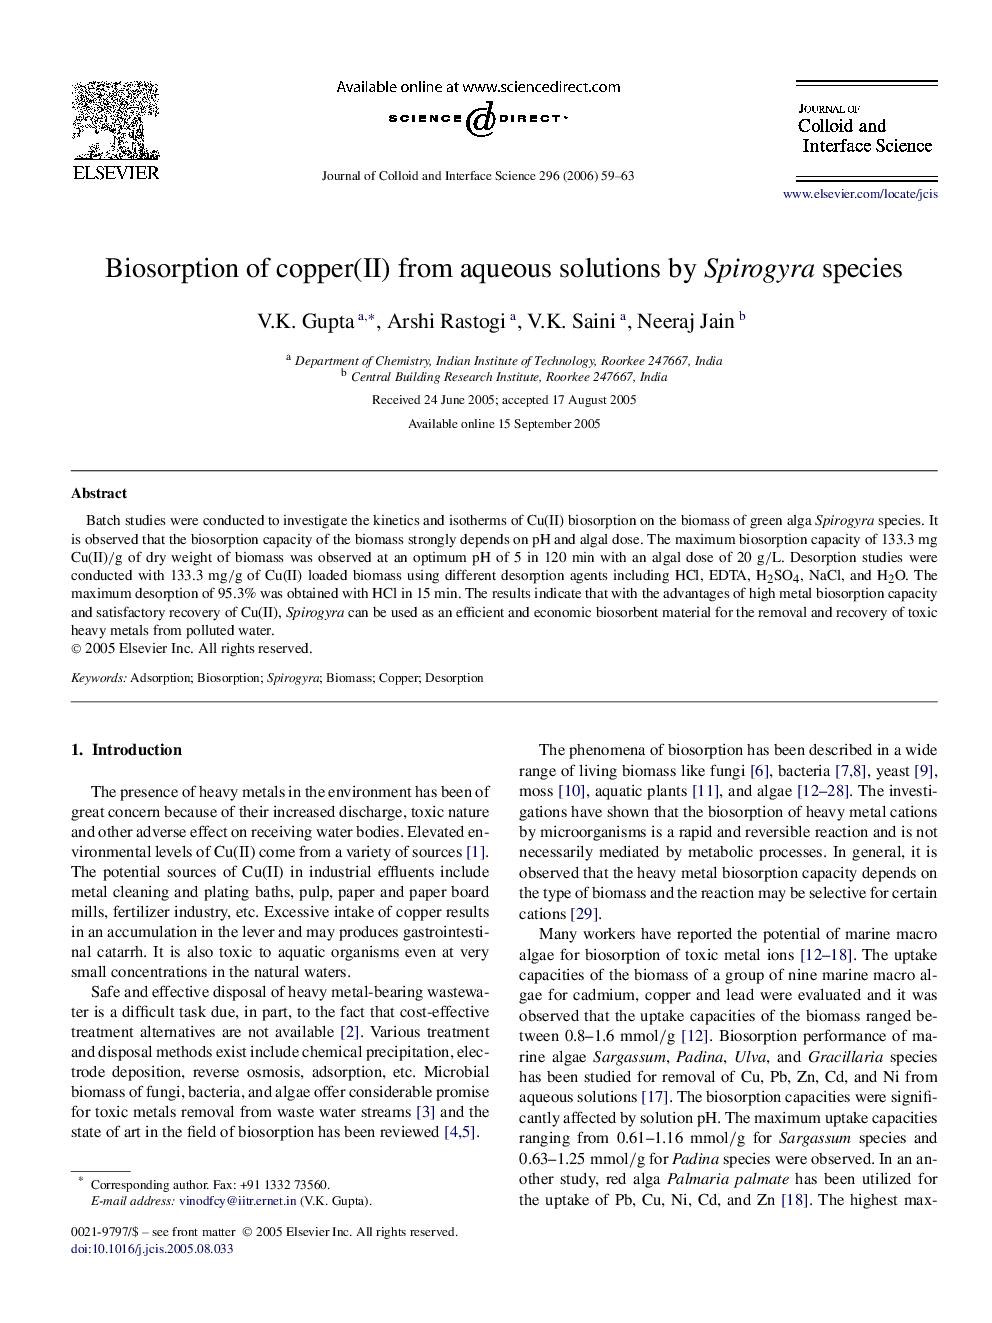 Biosorption of copper(II) from aqueous solutions by Spirogyra species